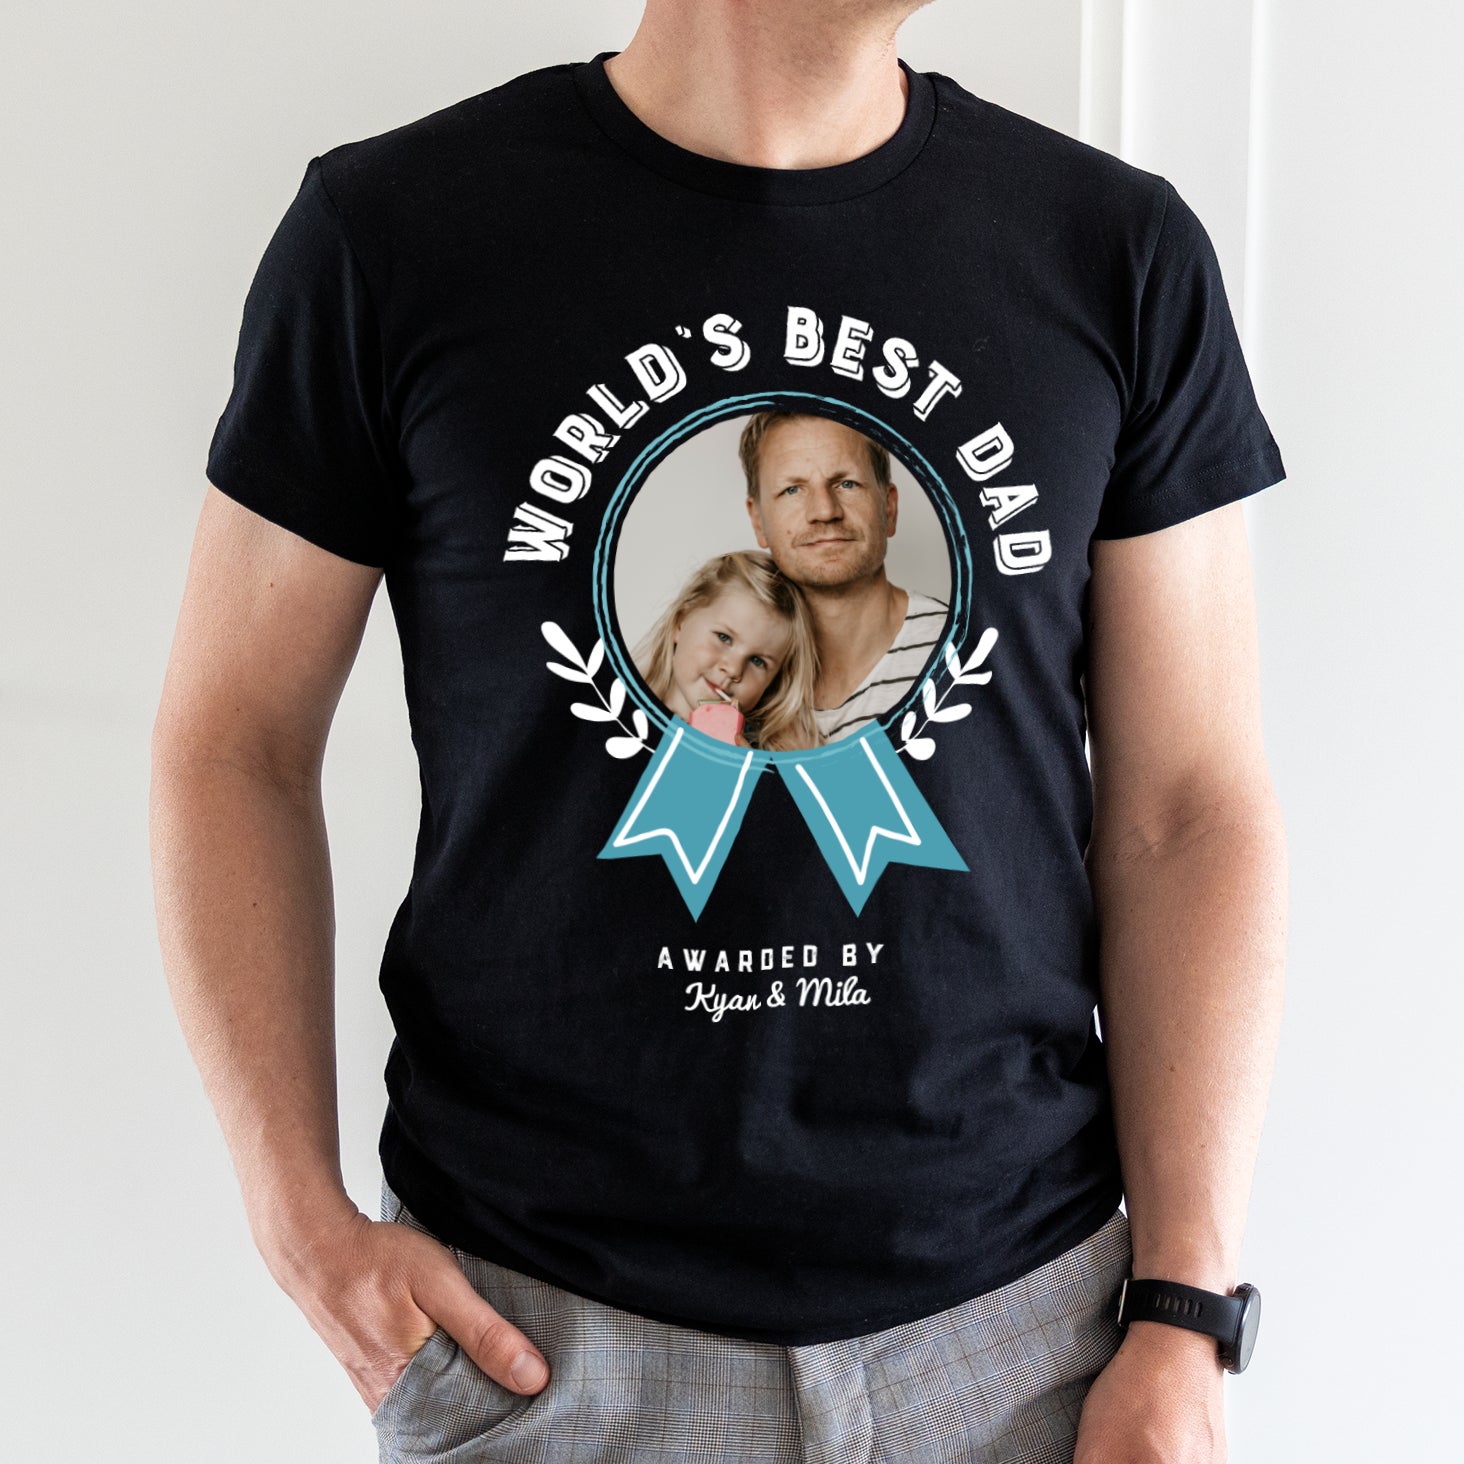 Personalised t-shirt - Father's Day - Black - XXL